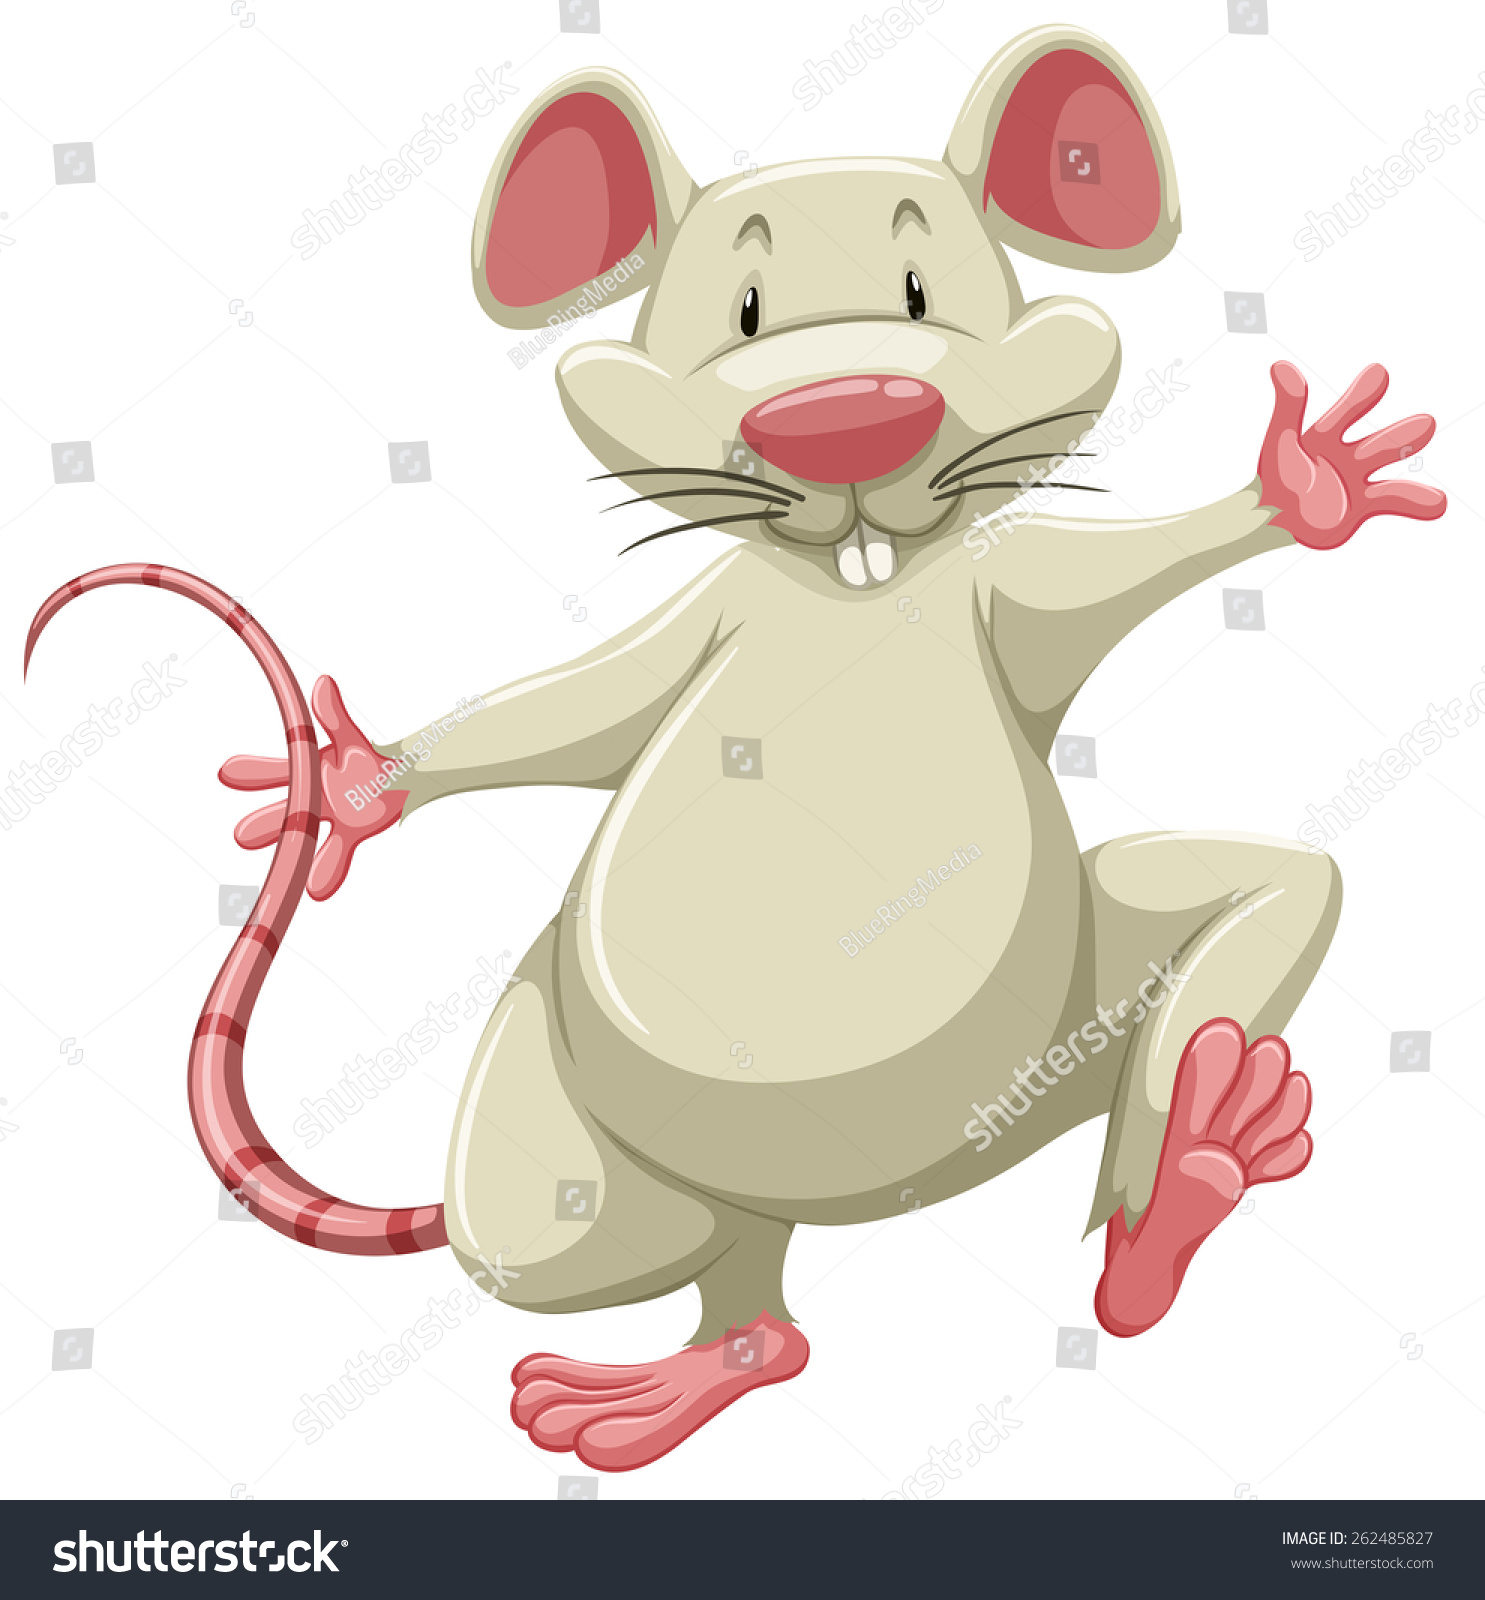 Playful Little Creature On White Background Stock Vector 262485827 ...